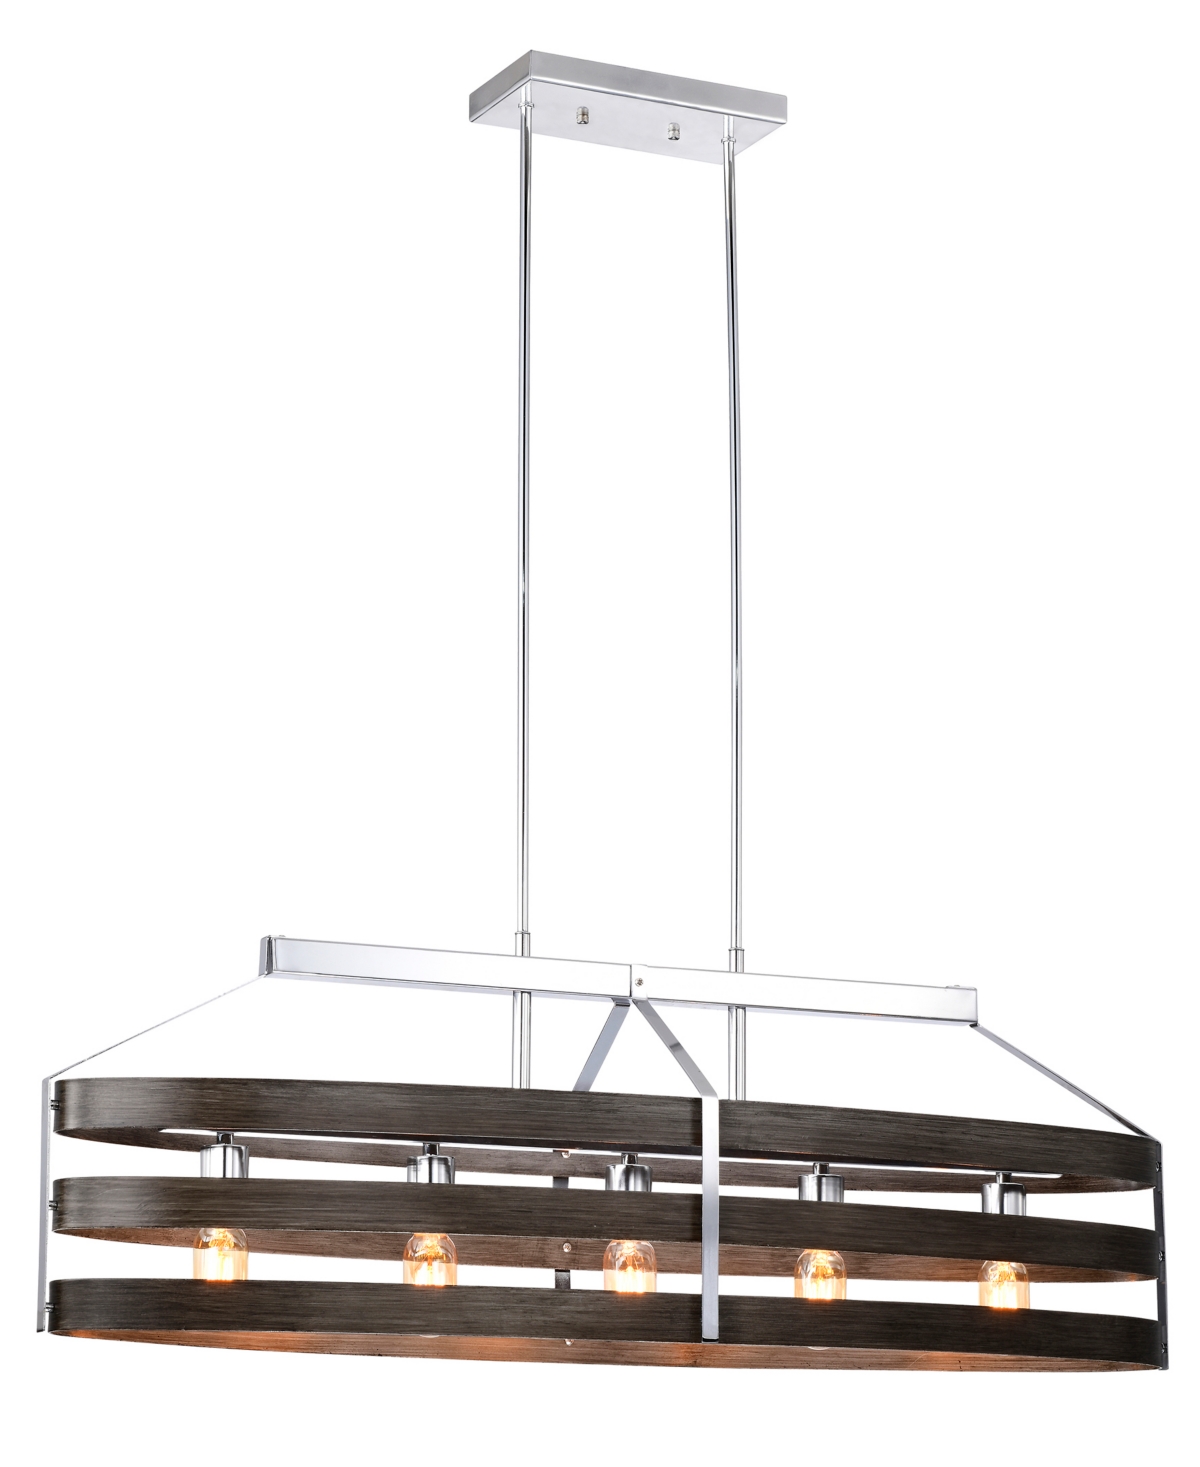 Home Accessories Franc 40" Indoor Finish Chandelier With Light Kit In Polished Chrome And Faux Wood Grain